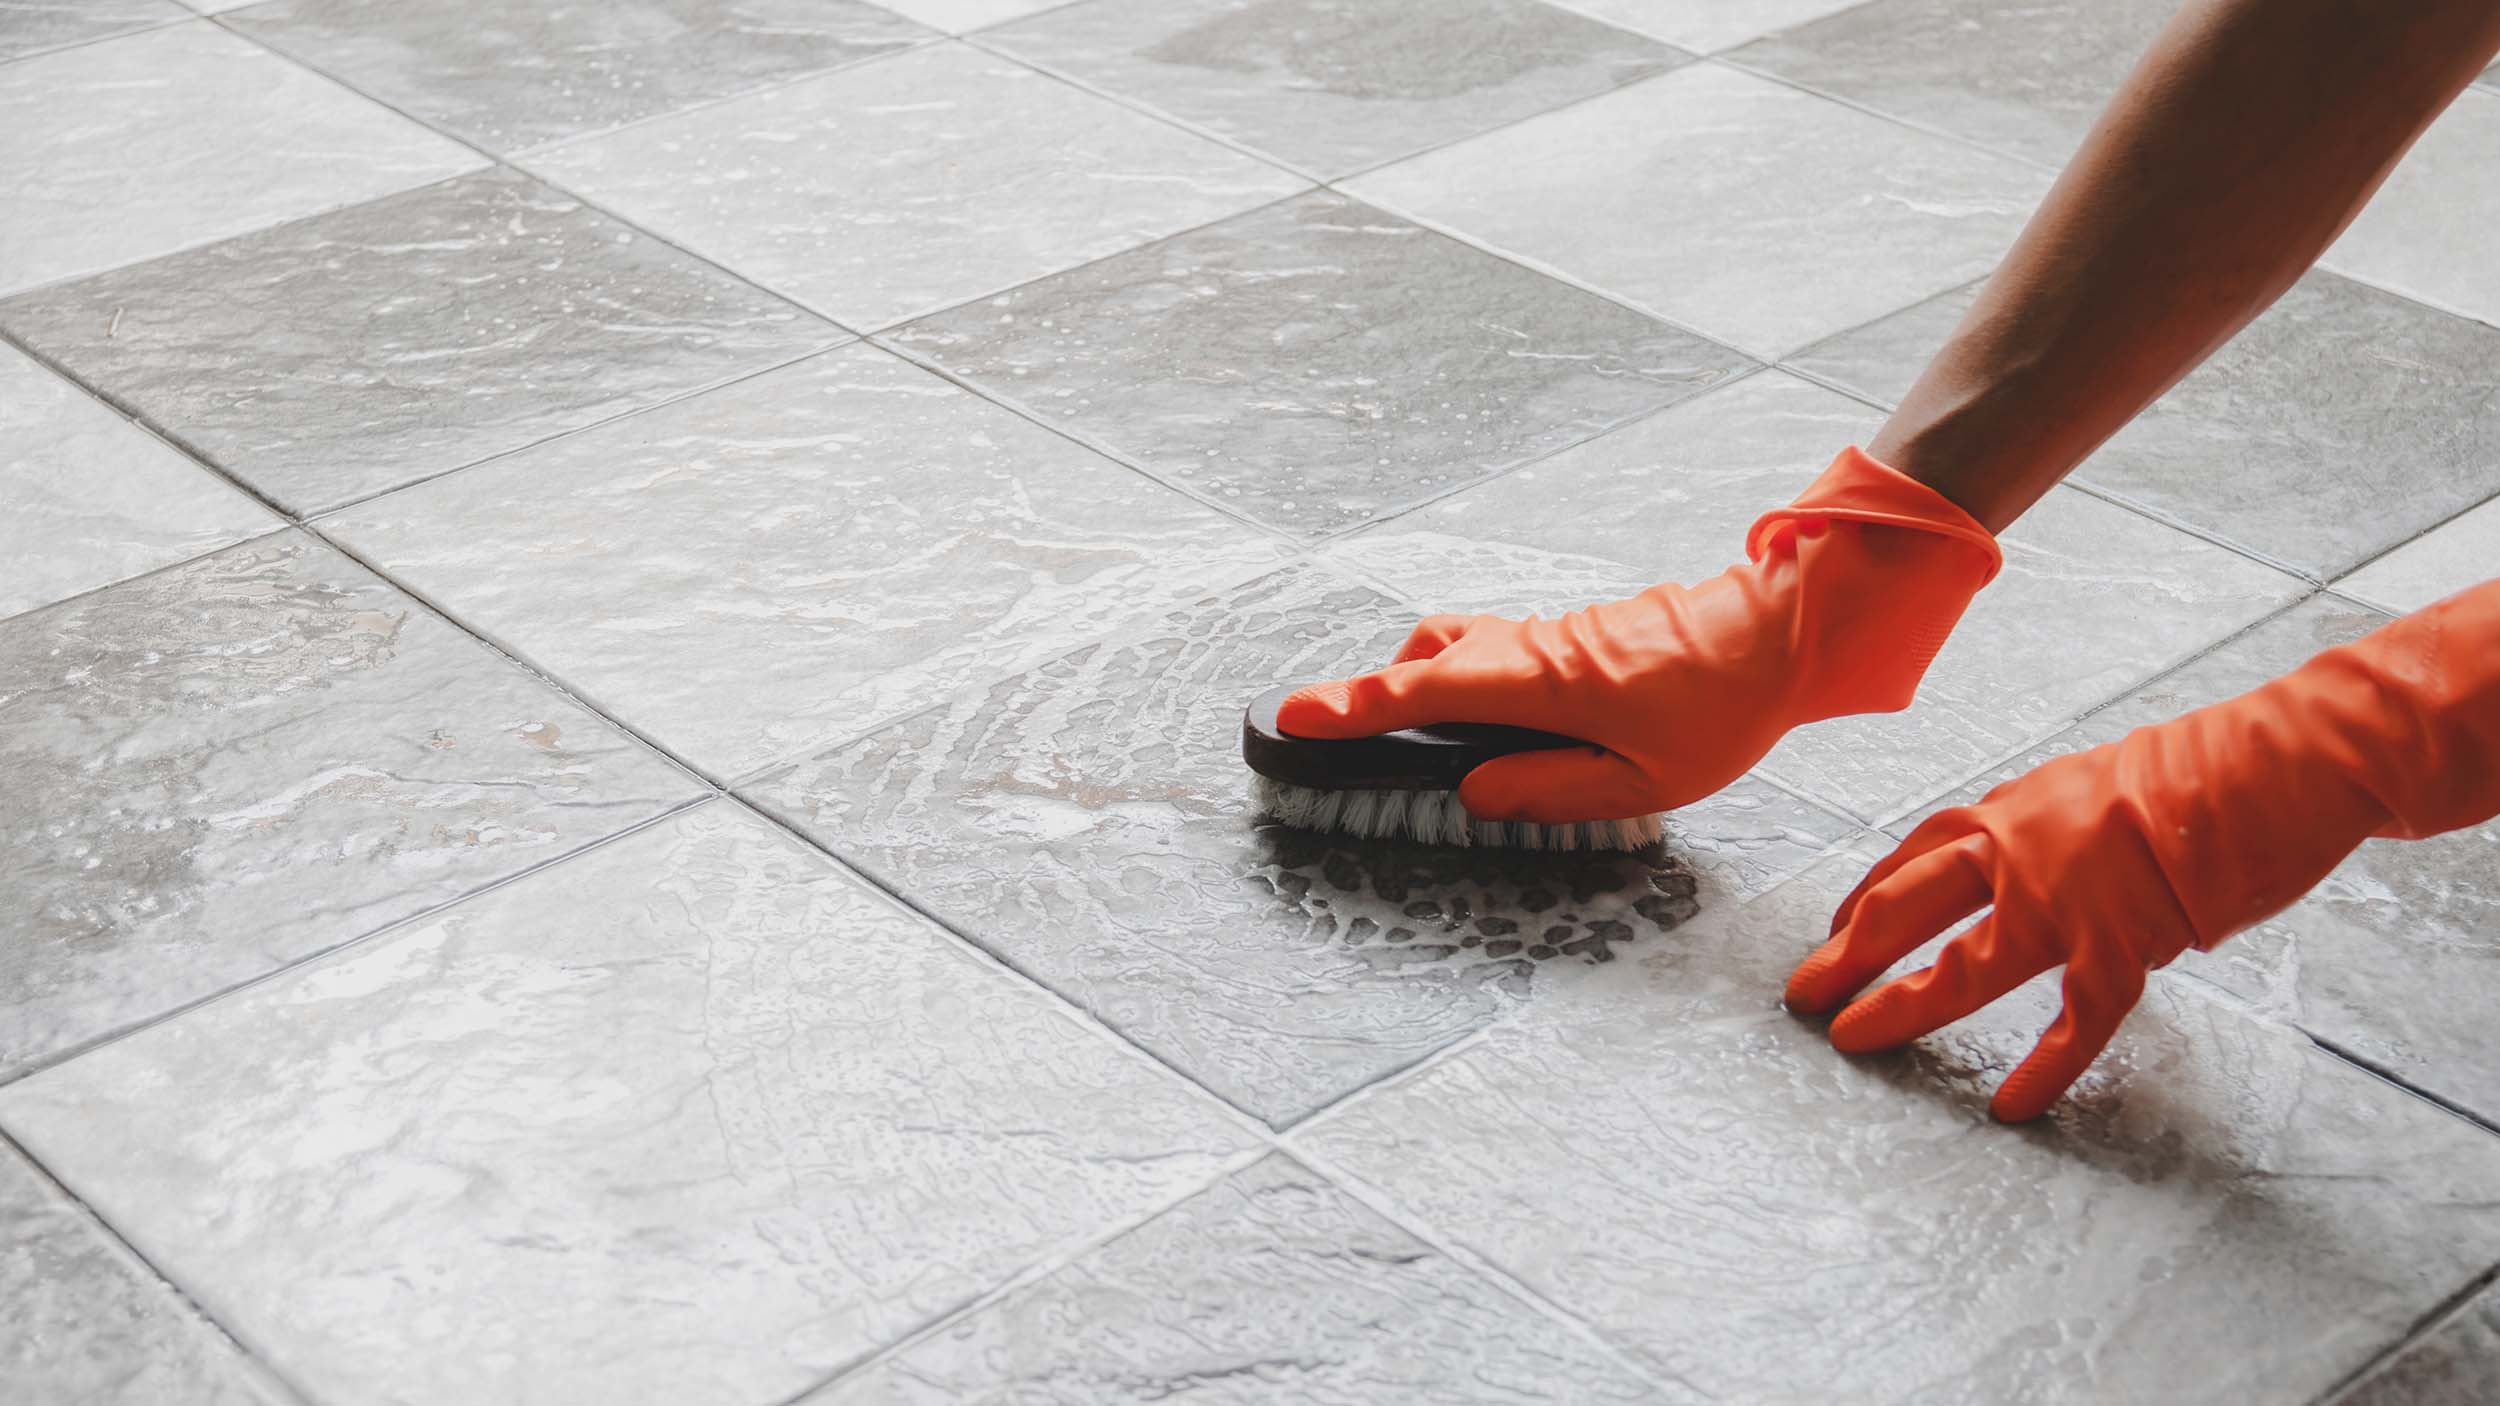 6 Best Ways to Clean Grout on Tile Floors